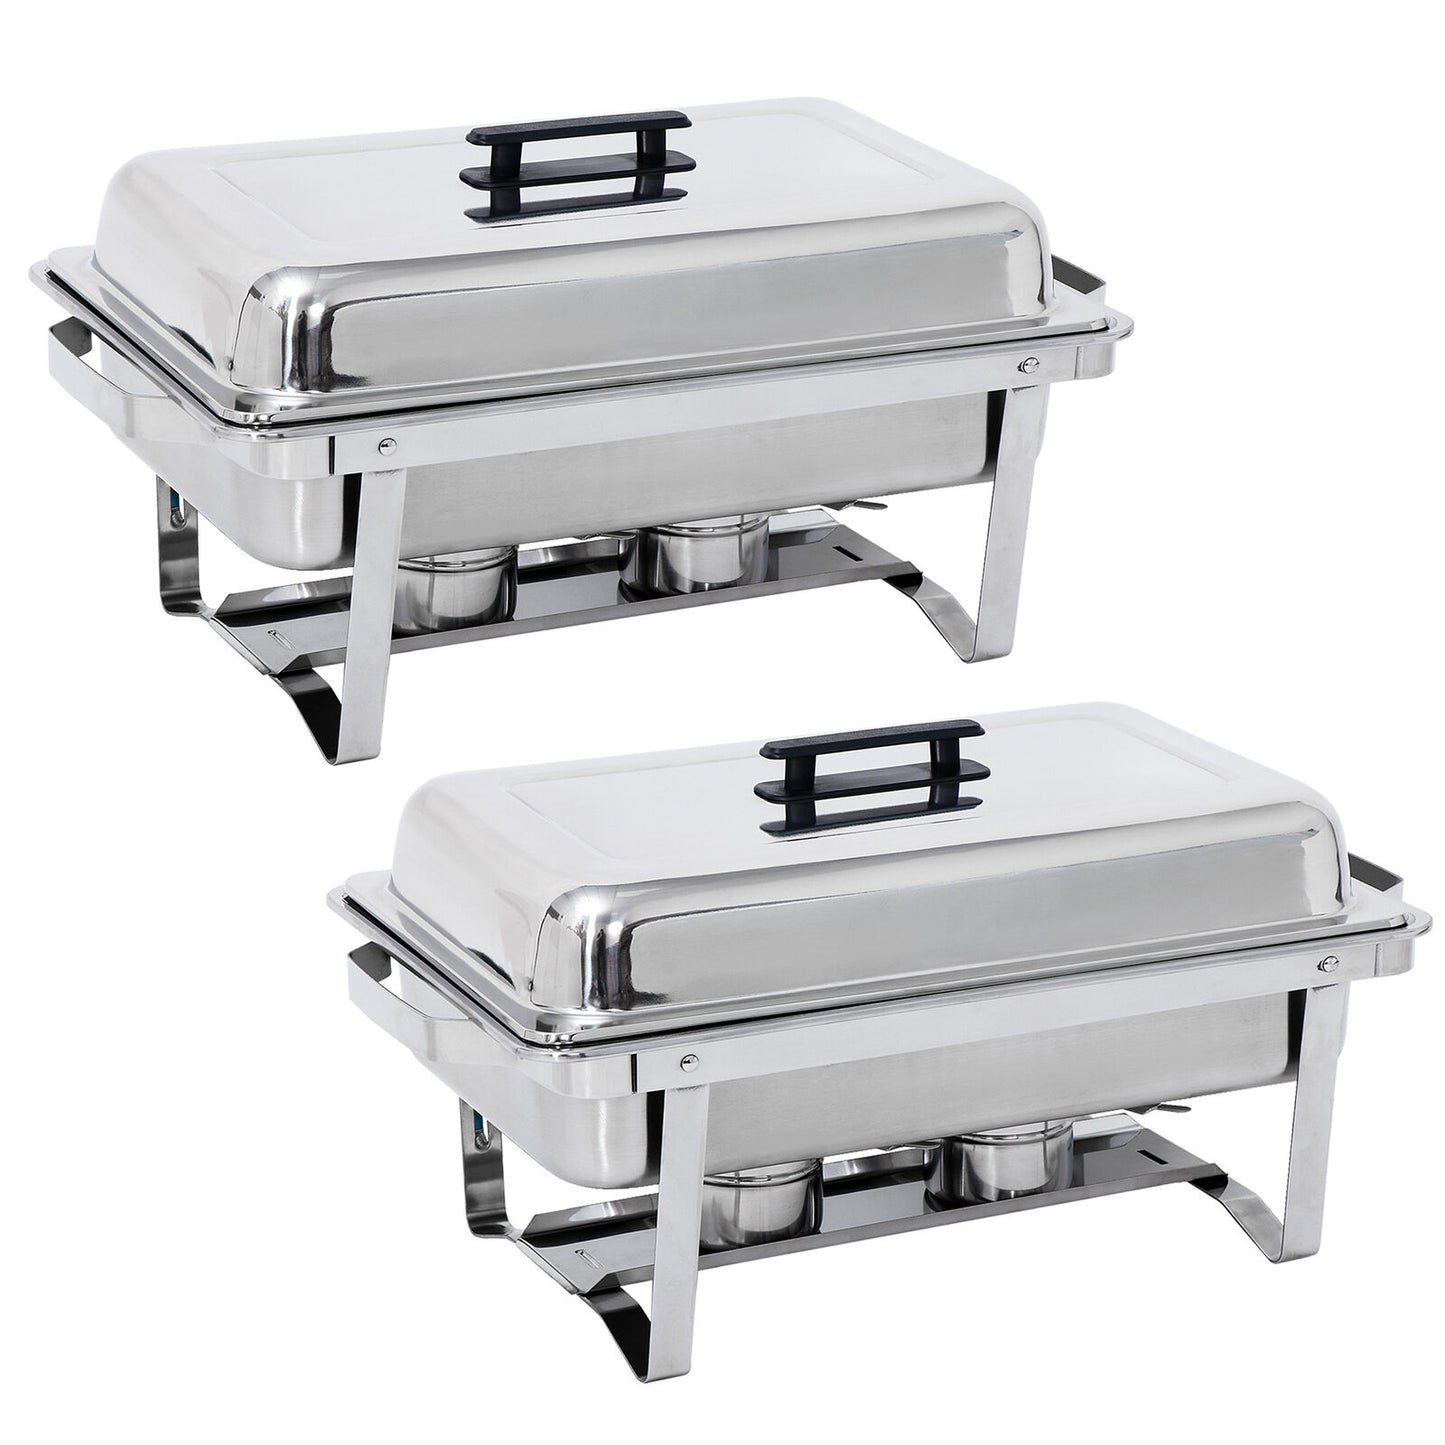 Stainless Steel 2 Round Chafing Dish+2 Rectangular Chafers w/Foldable Frame Legs